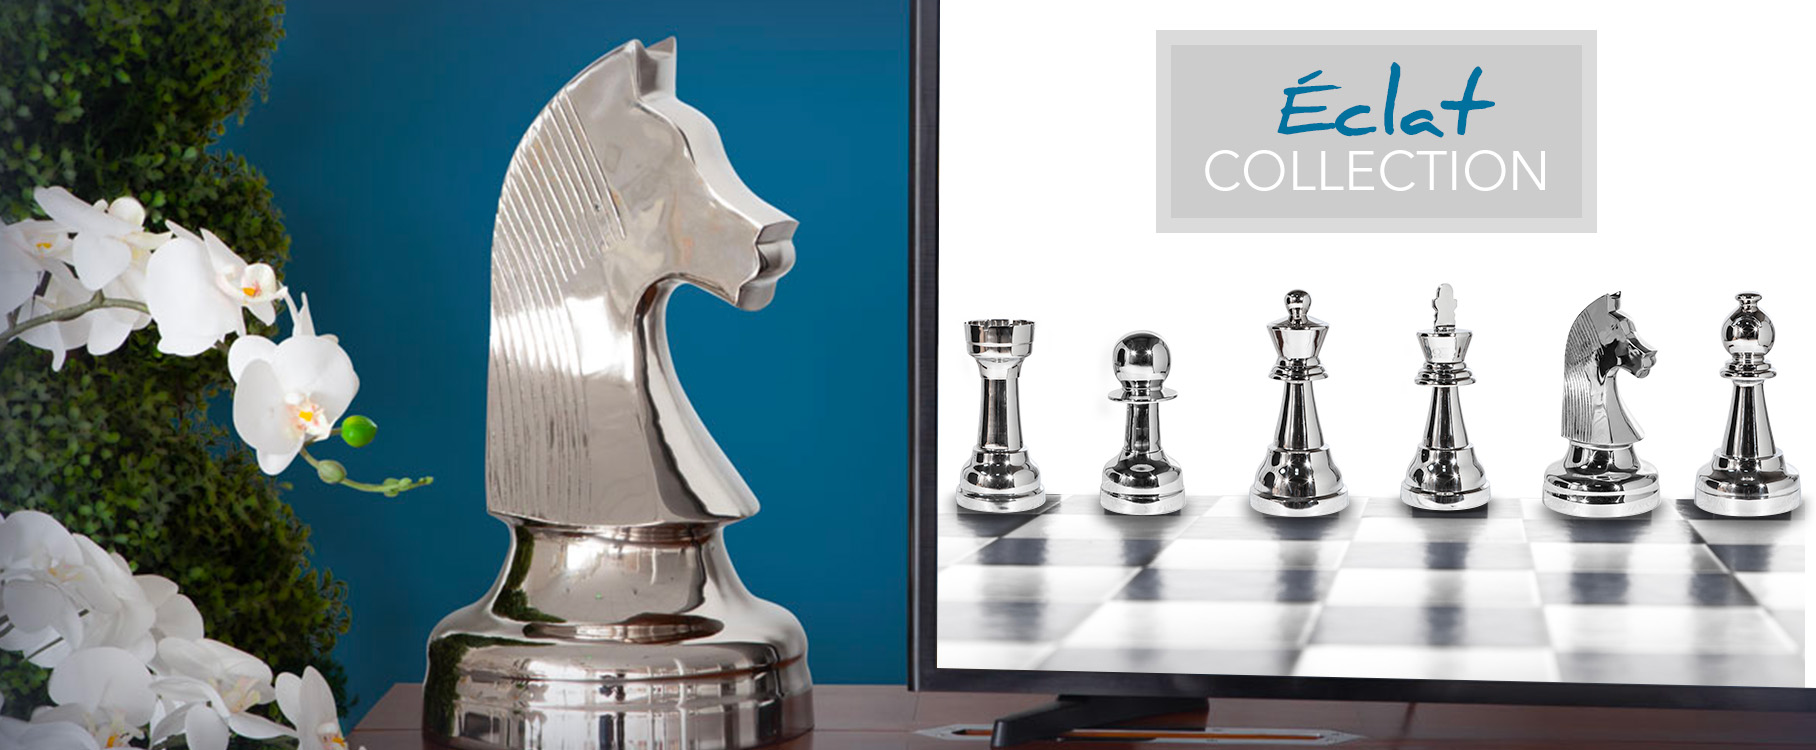 Stainless steel decorative pieces from the Eclat collection